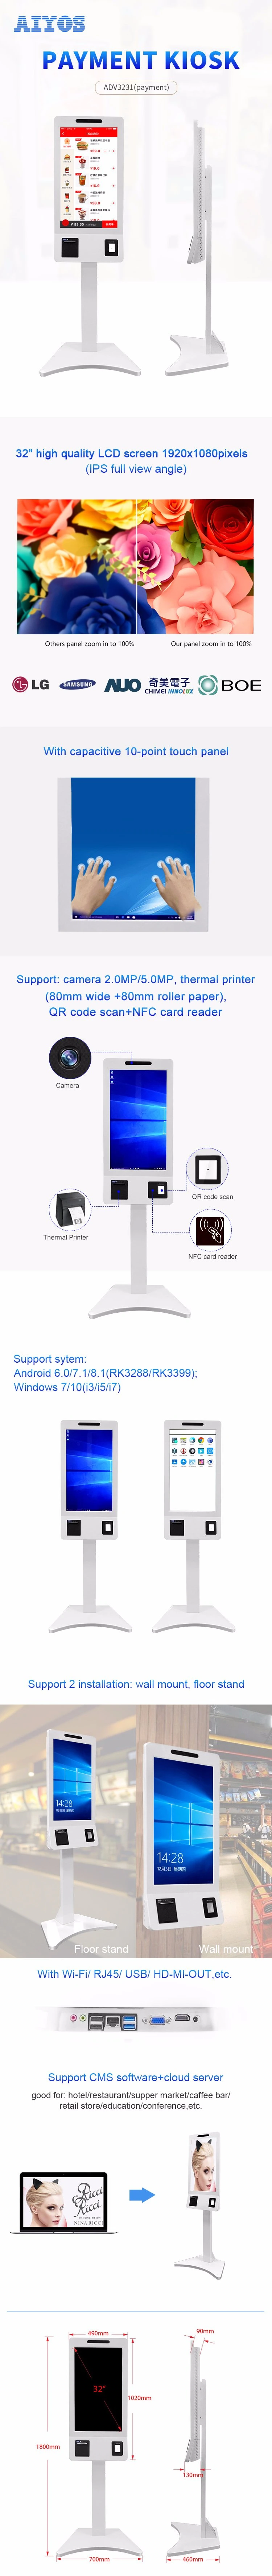 32 Inch Android LCD Screen Touch Panel Interactive Self Service Payment Kiosk for Restaurant Auto Ordering Support Printer and Camera, Credit Card